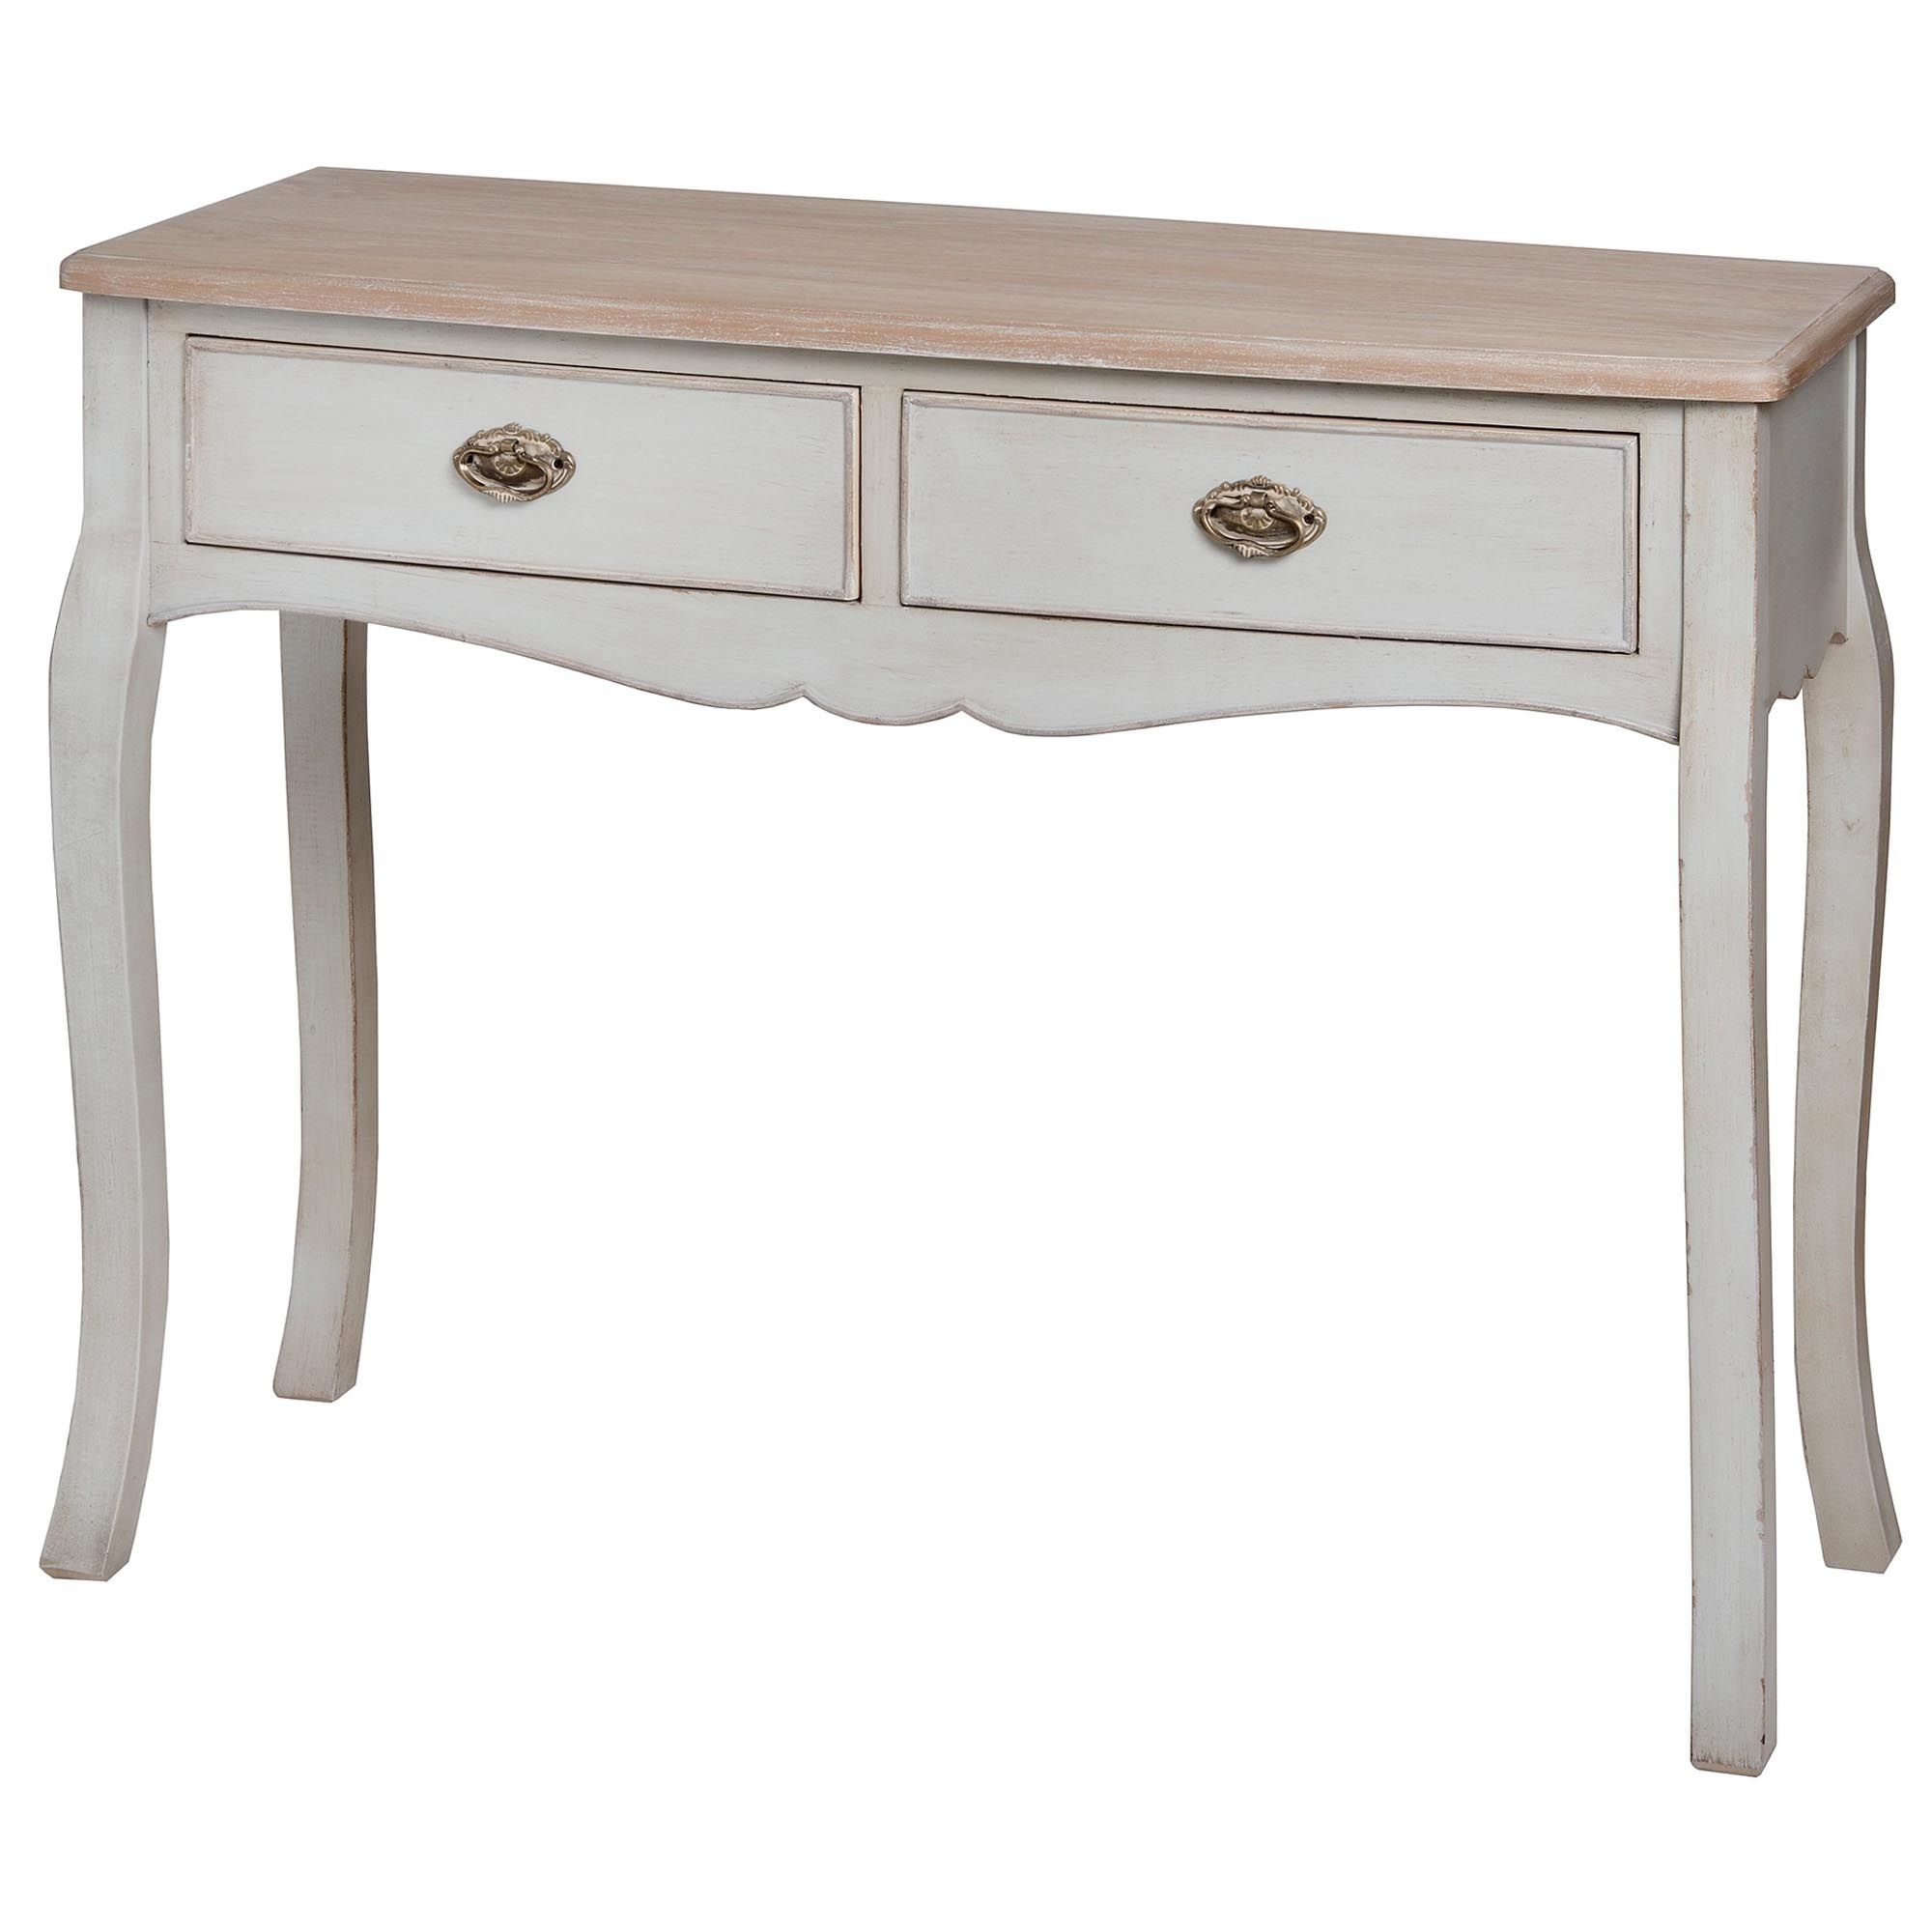 Louis Shabby Chic 2 Drawer Console Table | Table | Homesdirect365 Throughout 2 Drawer Console Tables (View 12 of 20)